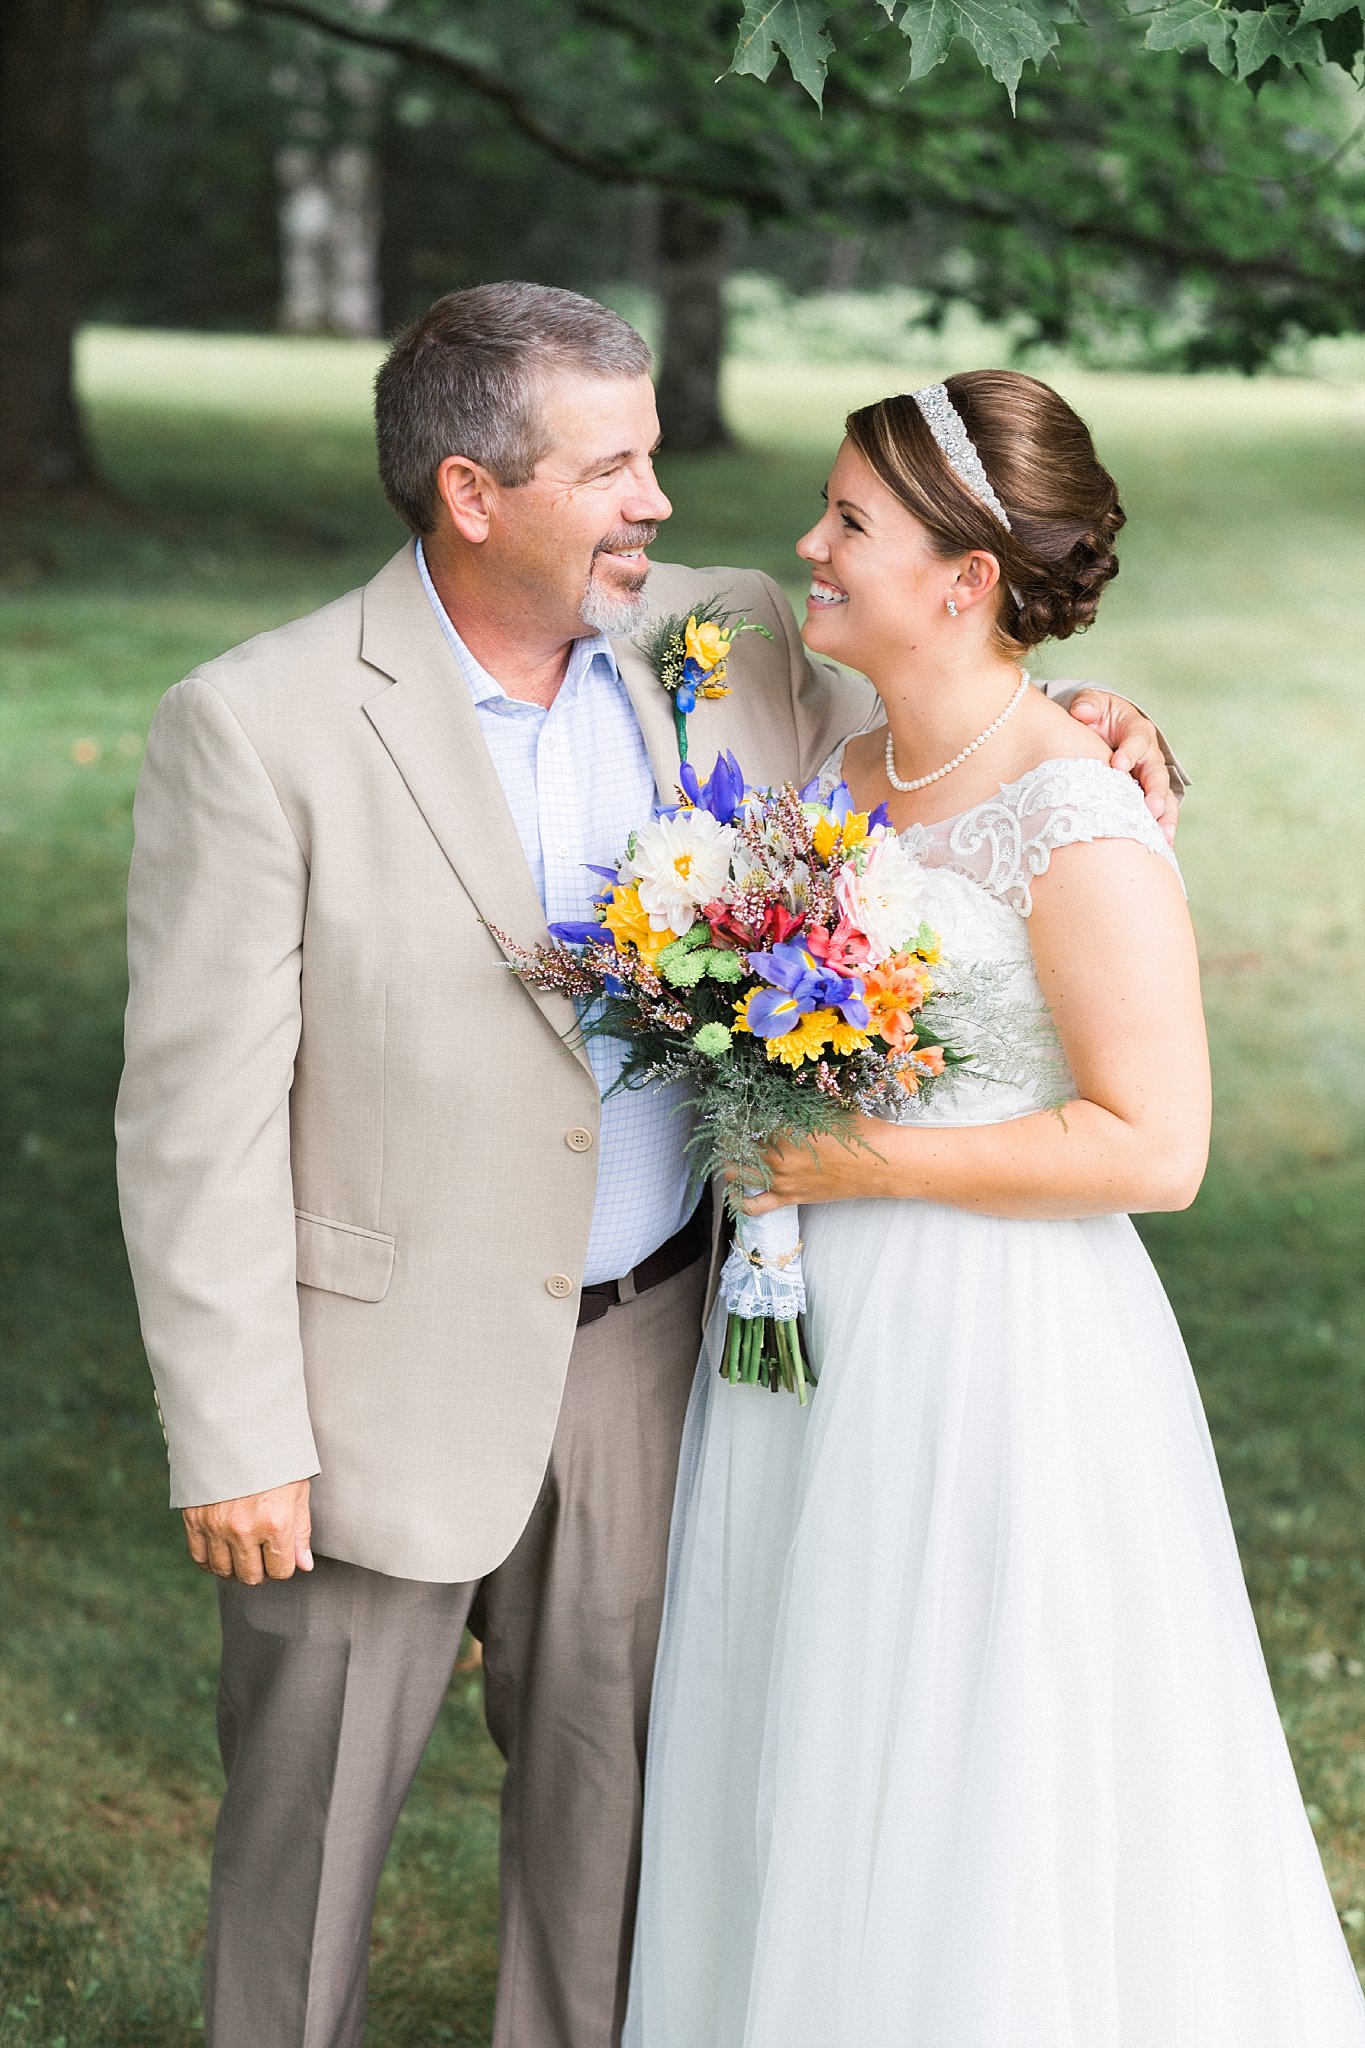 www.james-stokes.com | James Stokes Photography, LLC - father of the bride wedding photo by Wisconsin wedding photographer